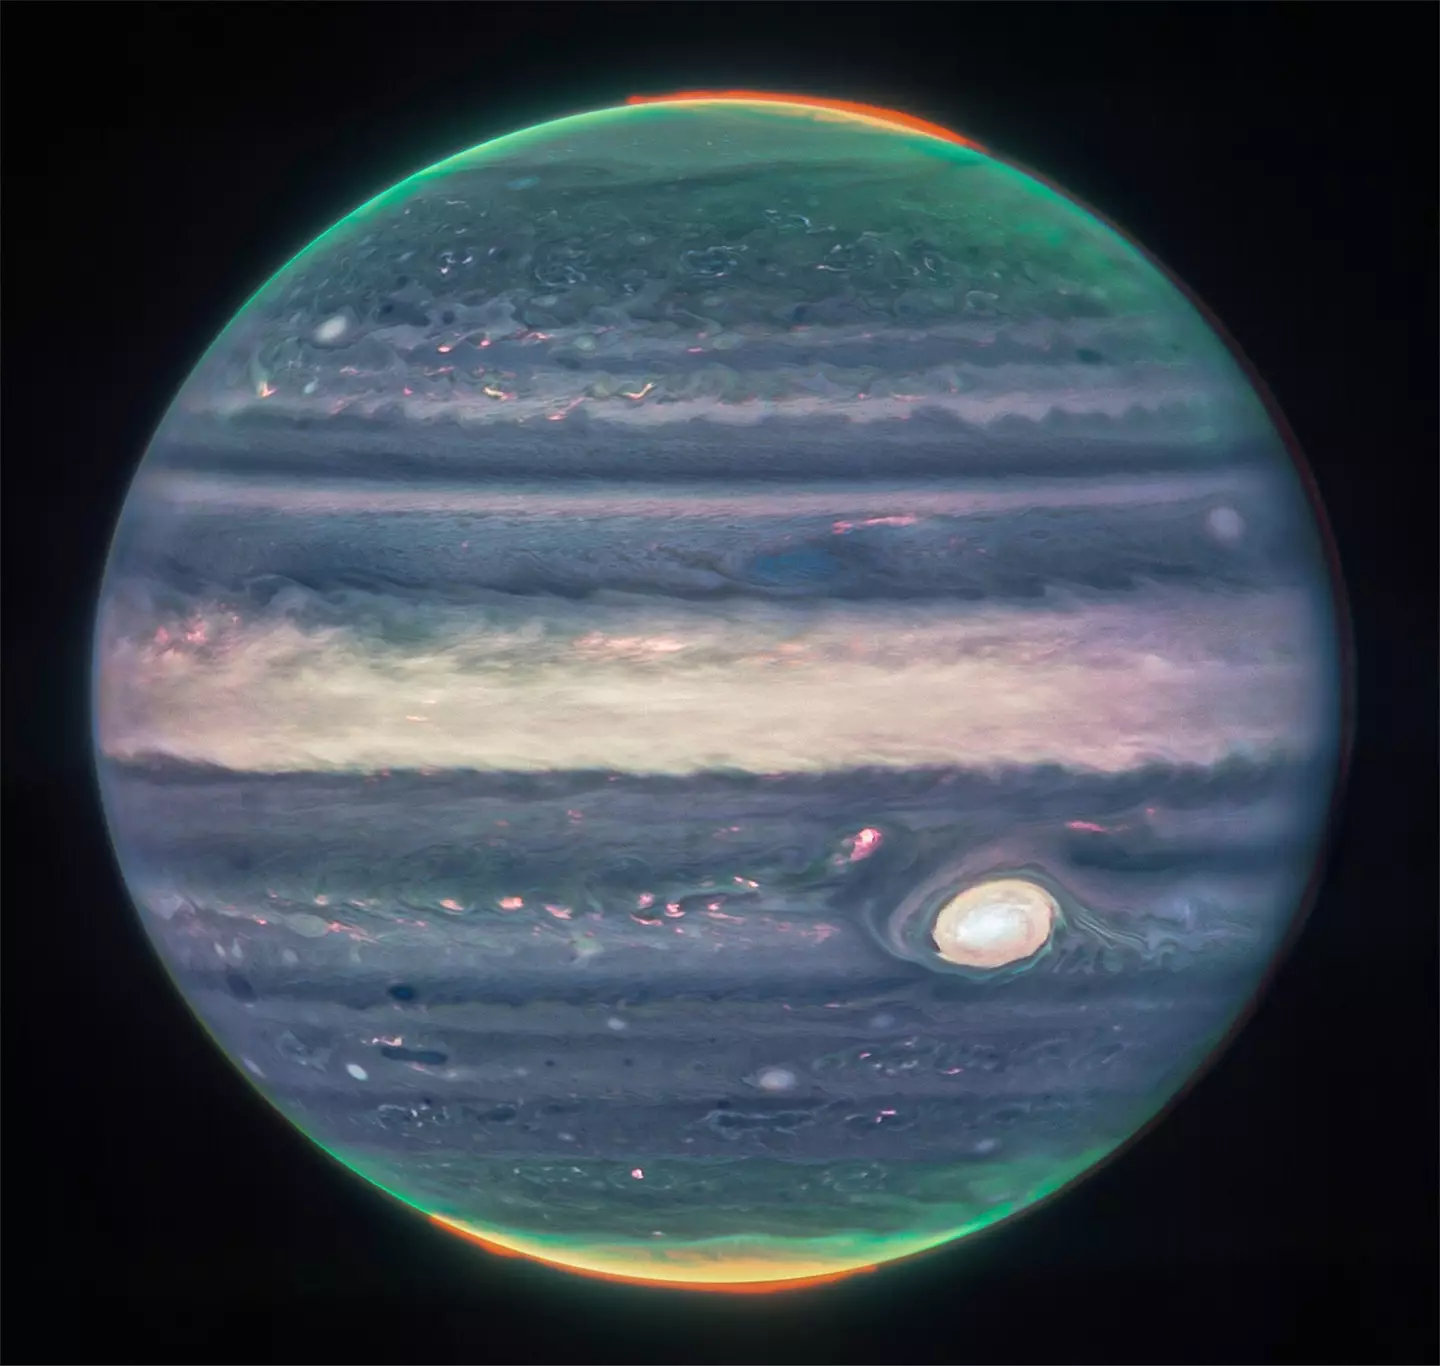 Detailed images of Jupiter were released by NASA last month.